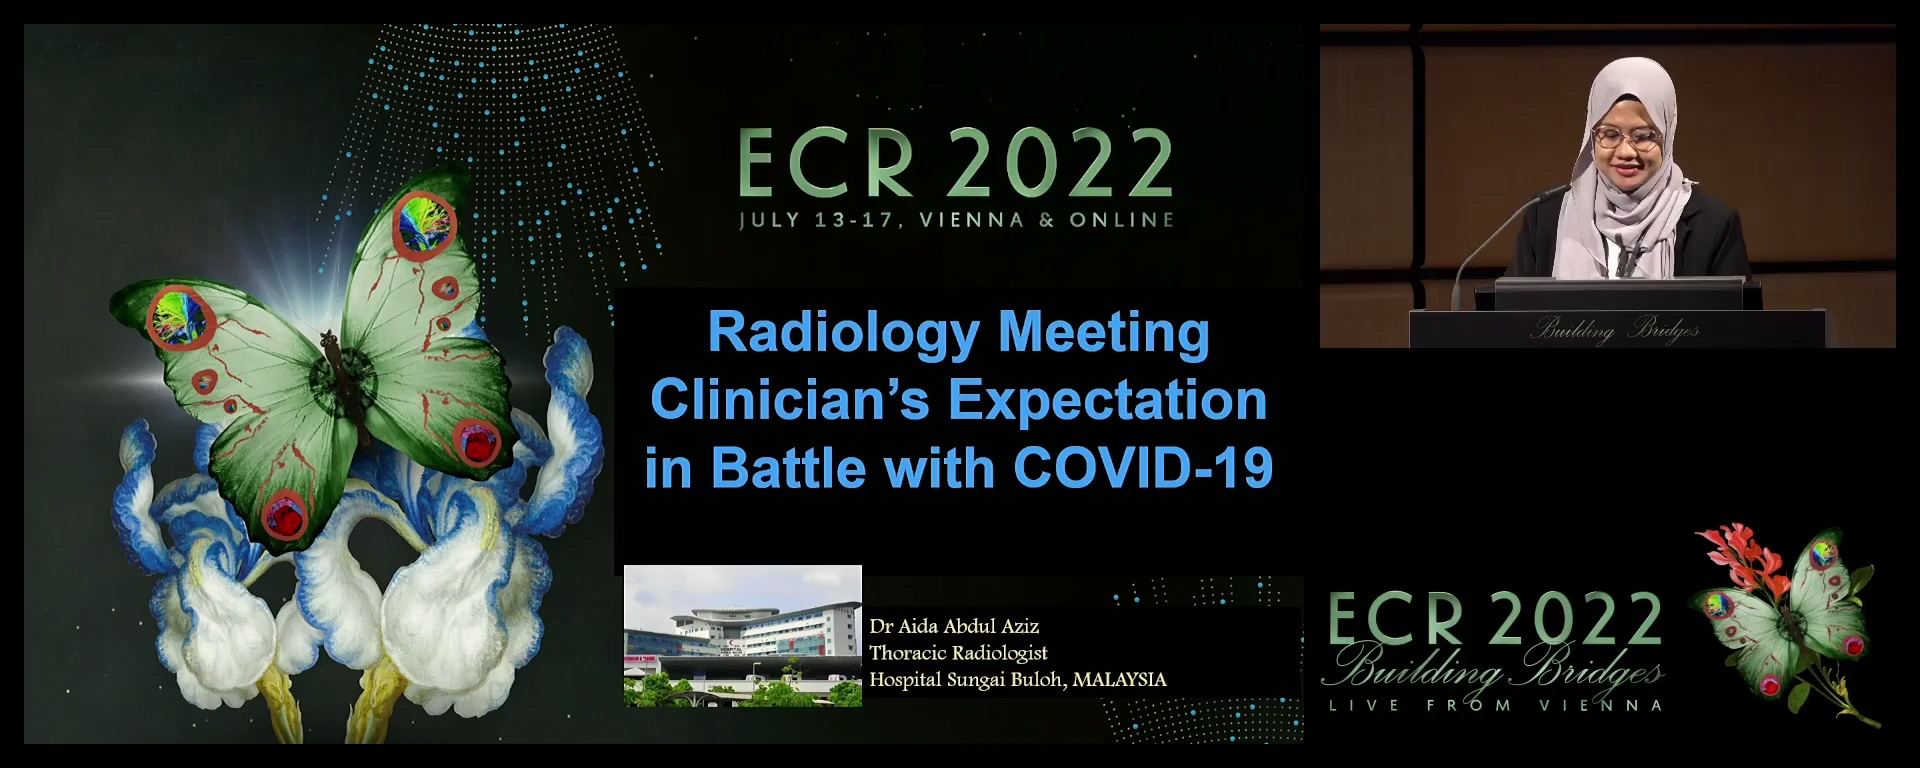 Radiology meeting the clinician's expectation in the battle with COVID-19